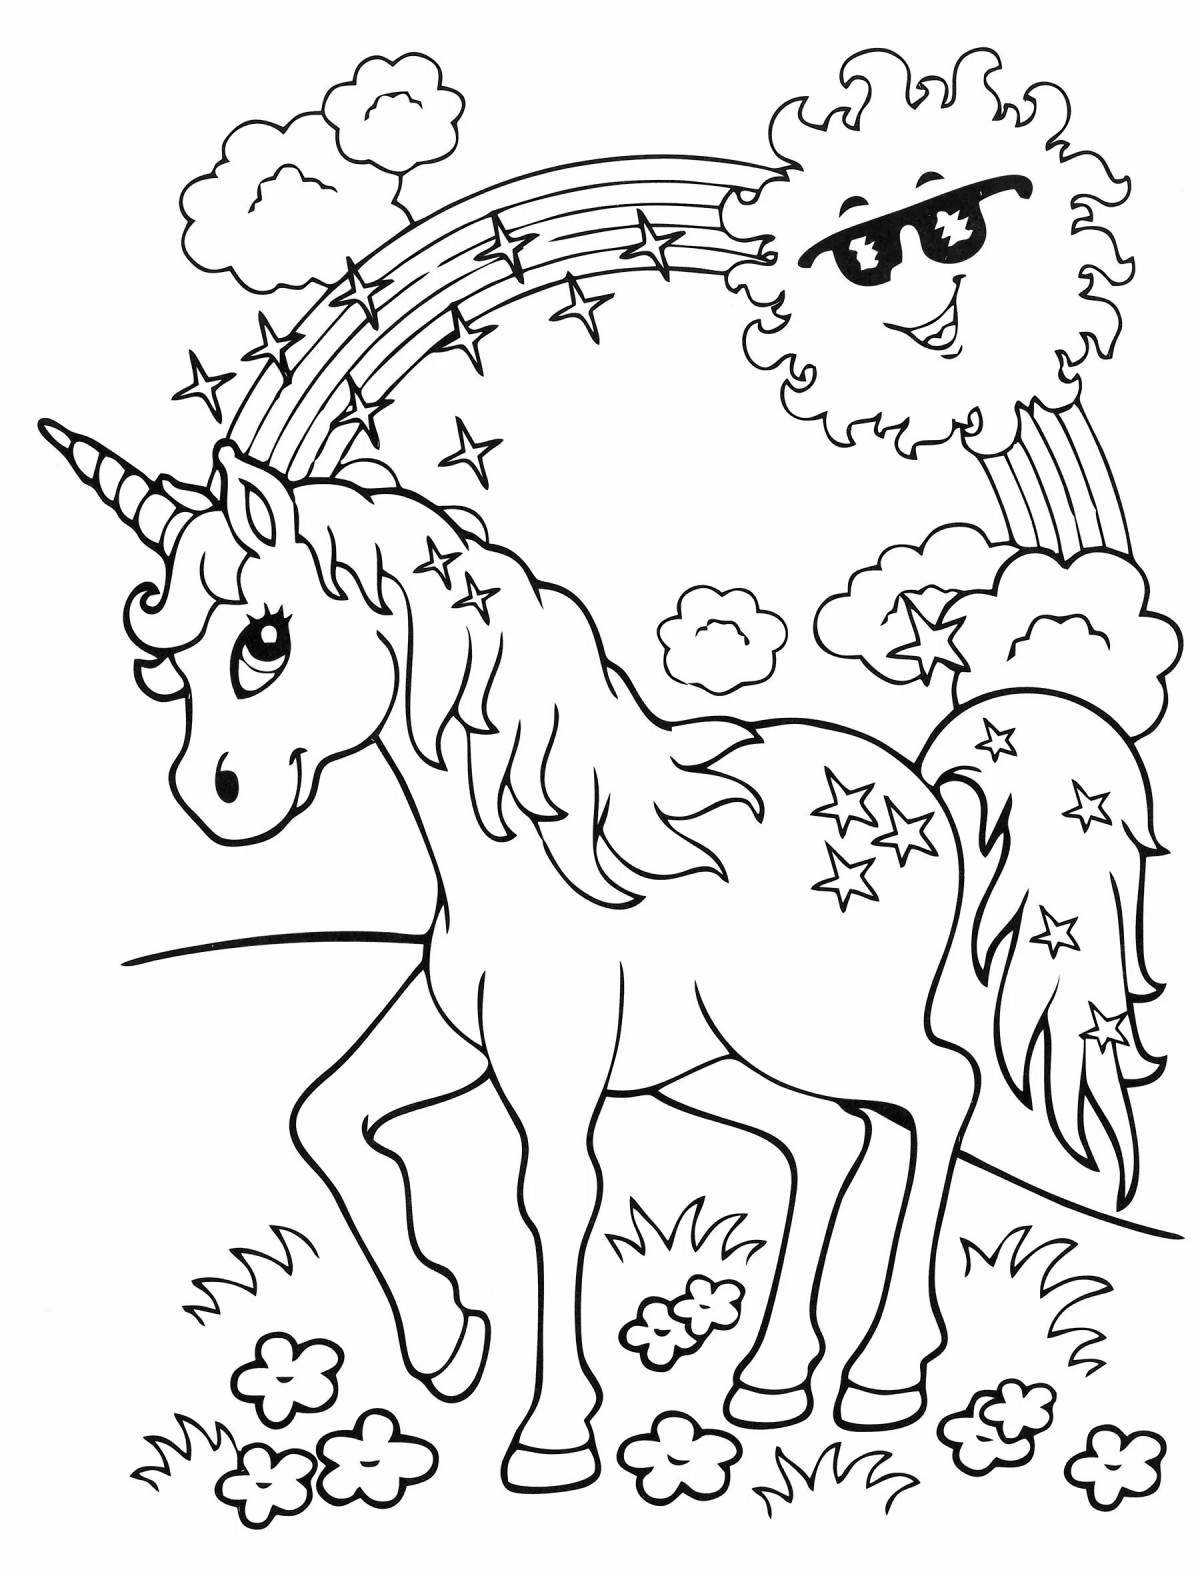 Fascinating coloring book for girls 7 years old unicorn